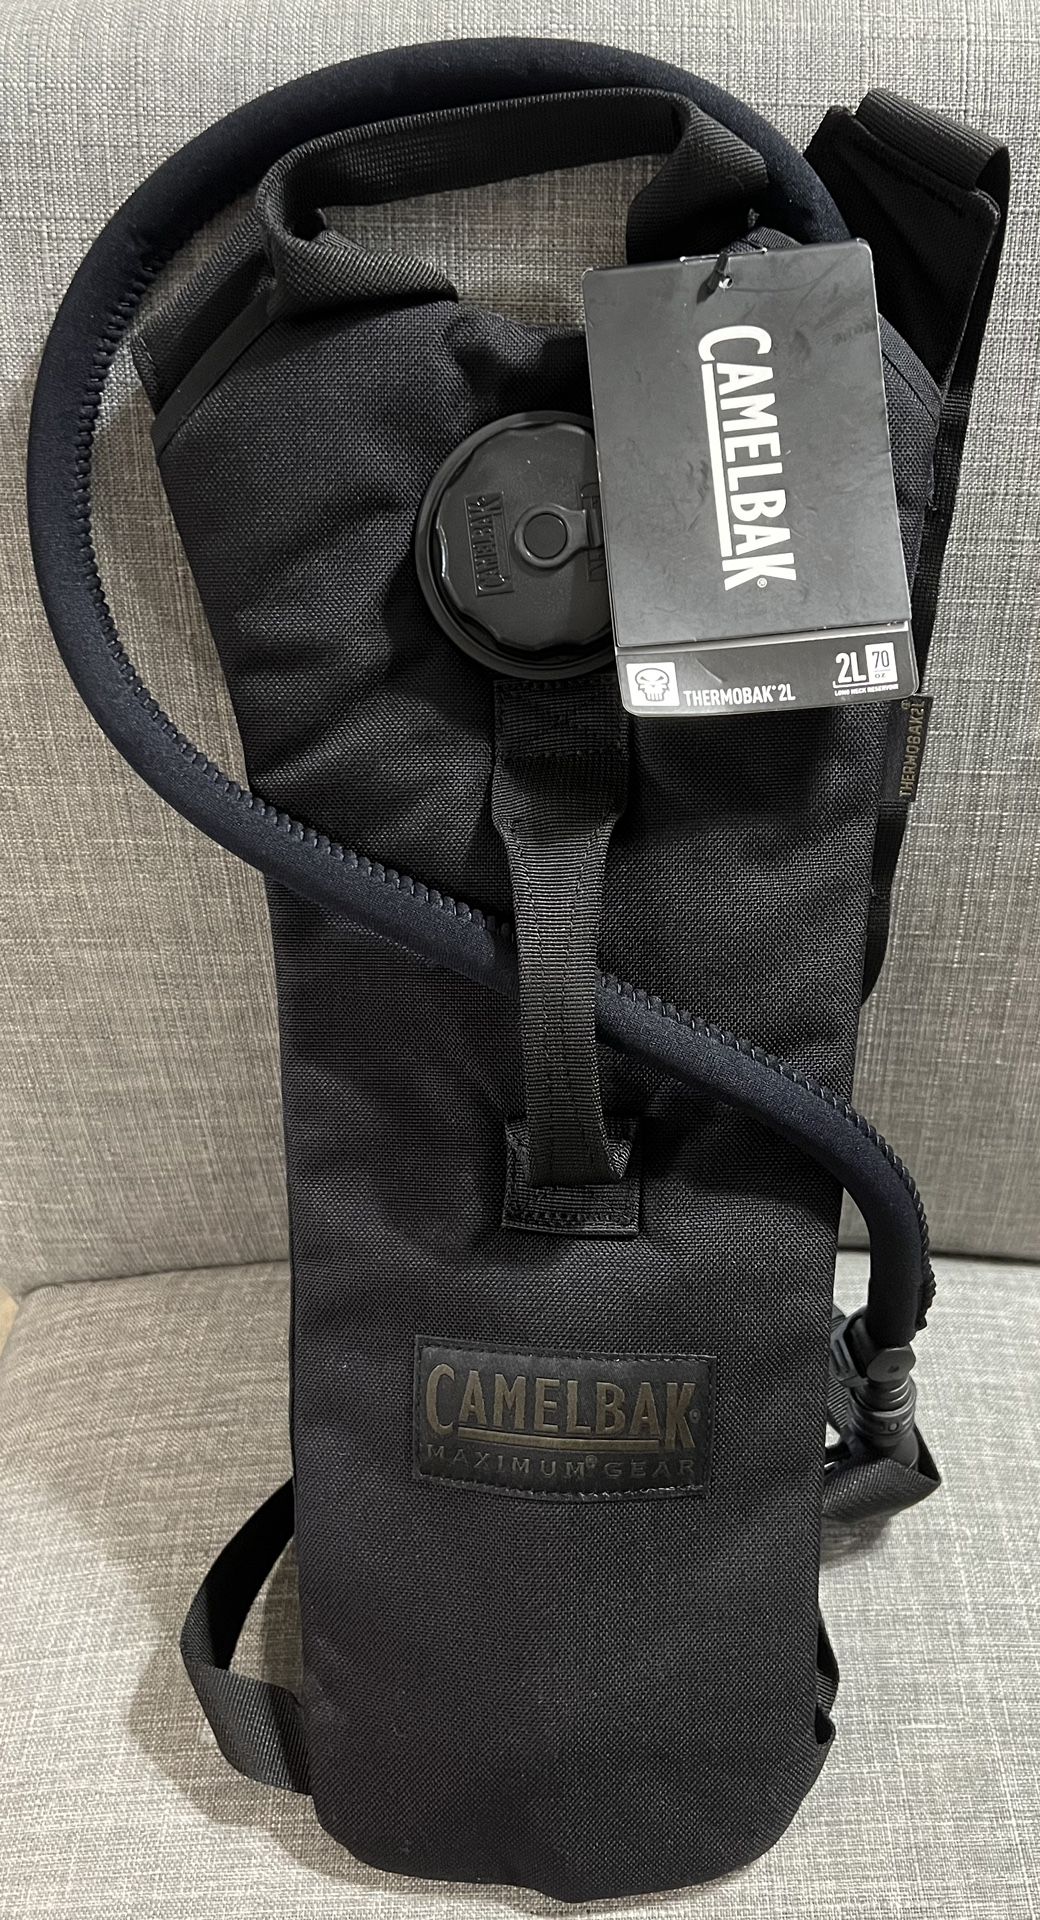 New CamelBak Hydration Pack 2L 70 Oz Hiking Outdoor